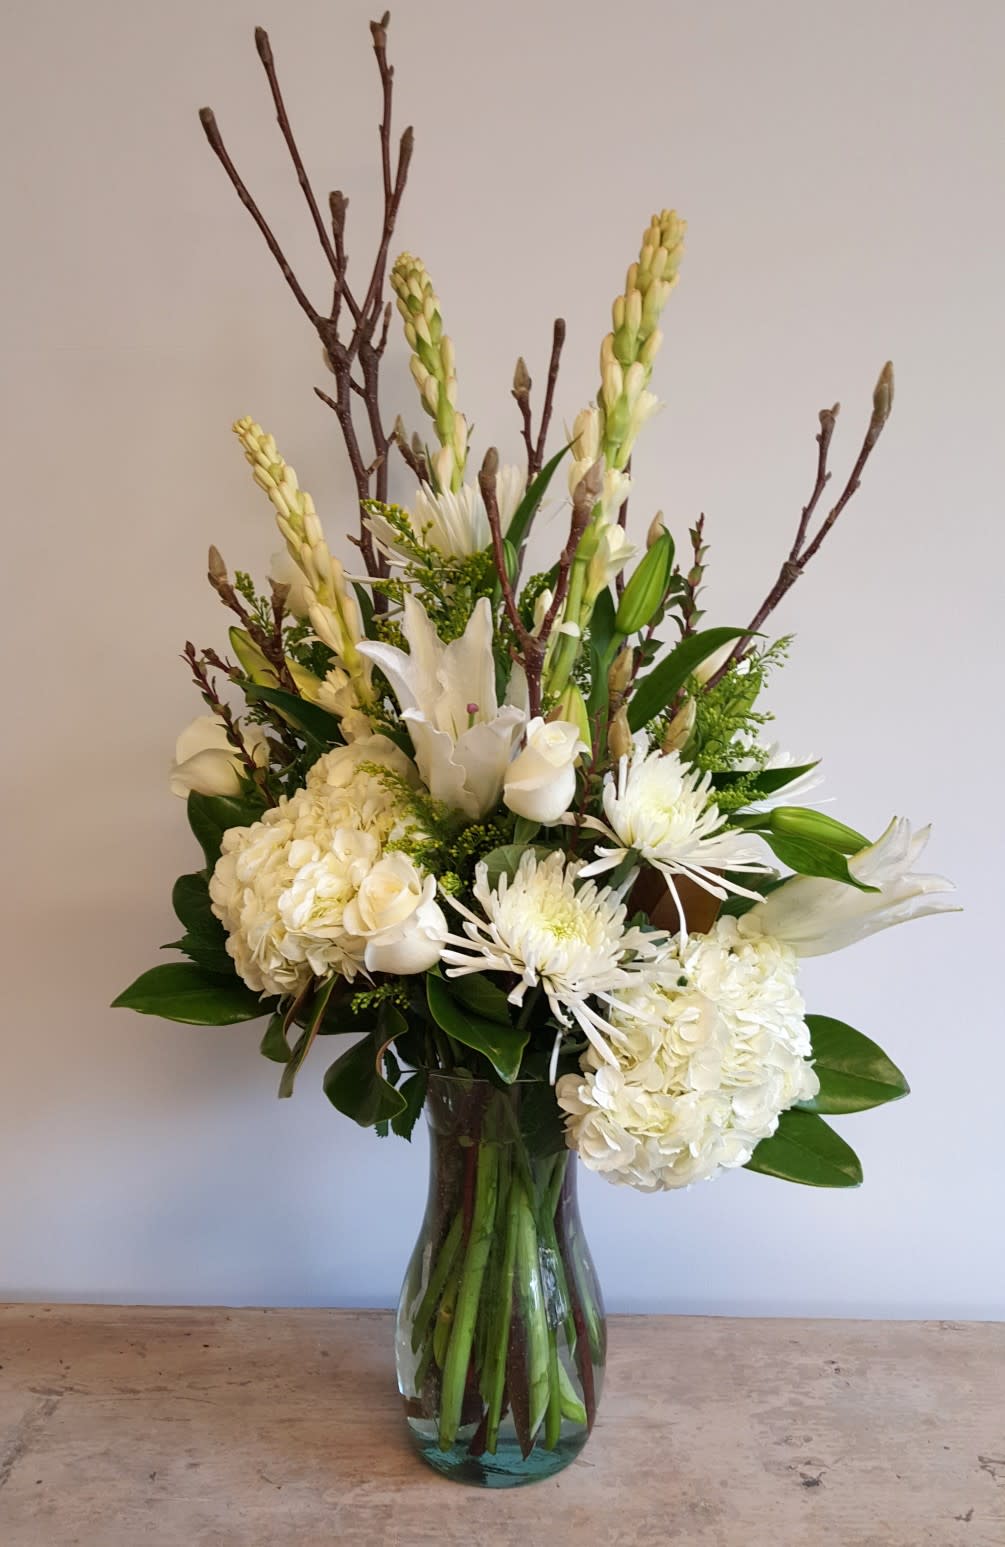 A wintery mix of flowers and foliage that is just perfect for